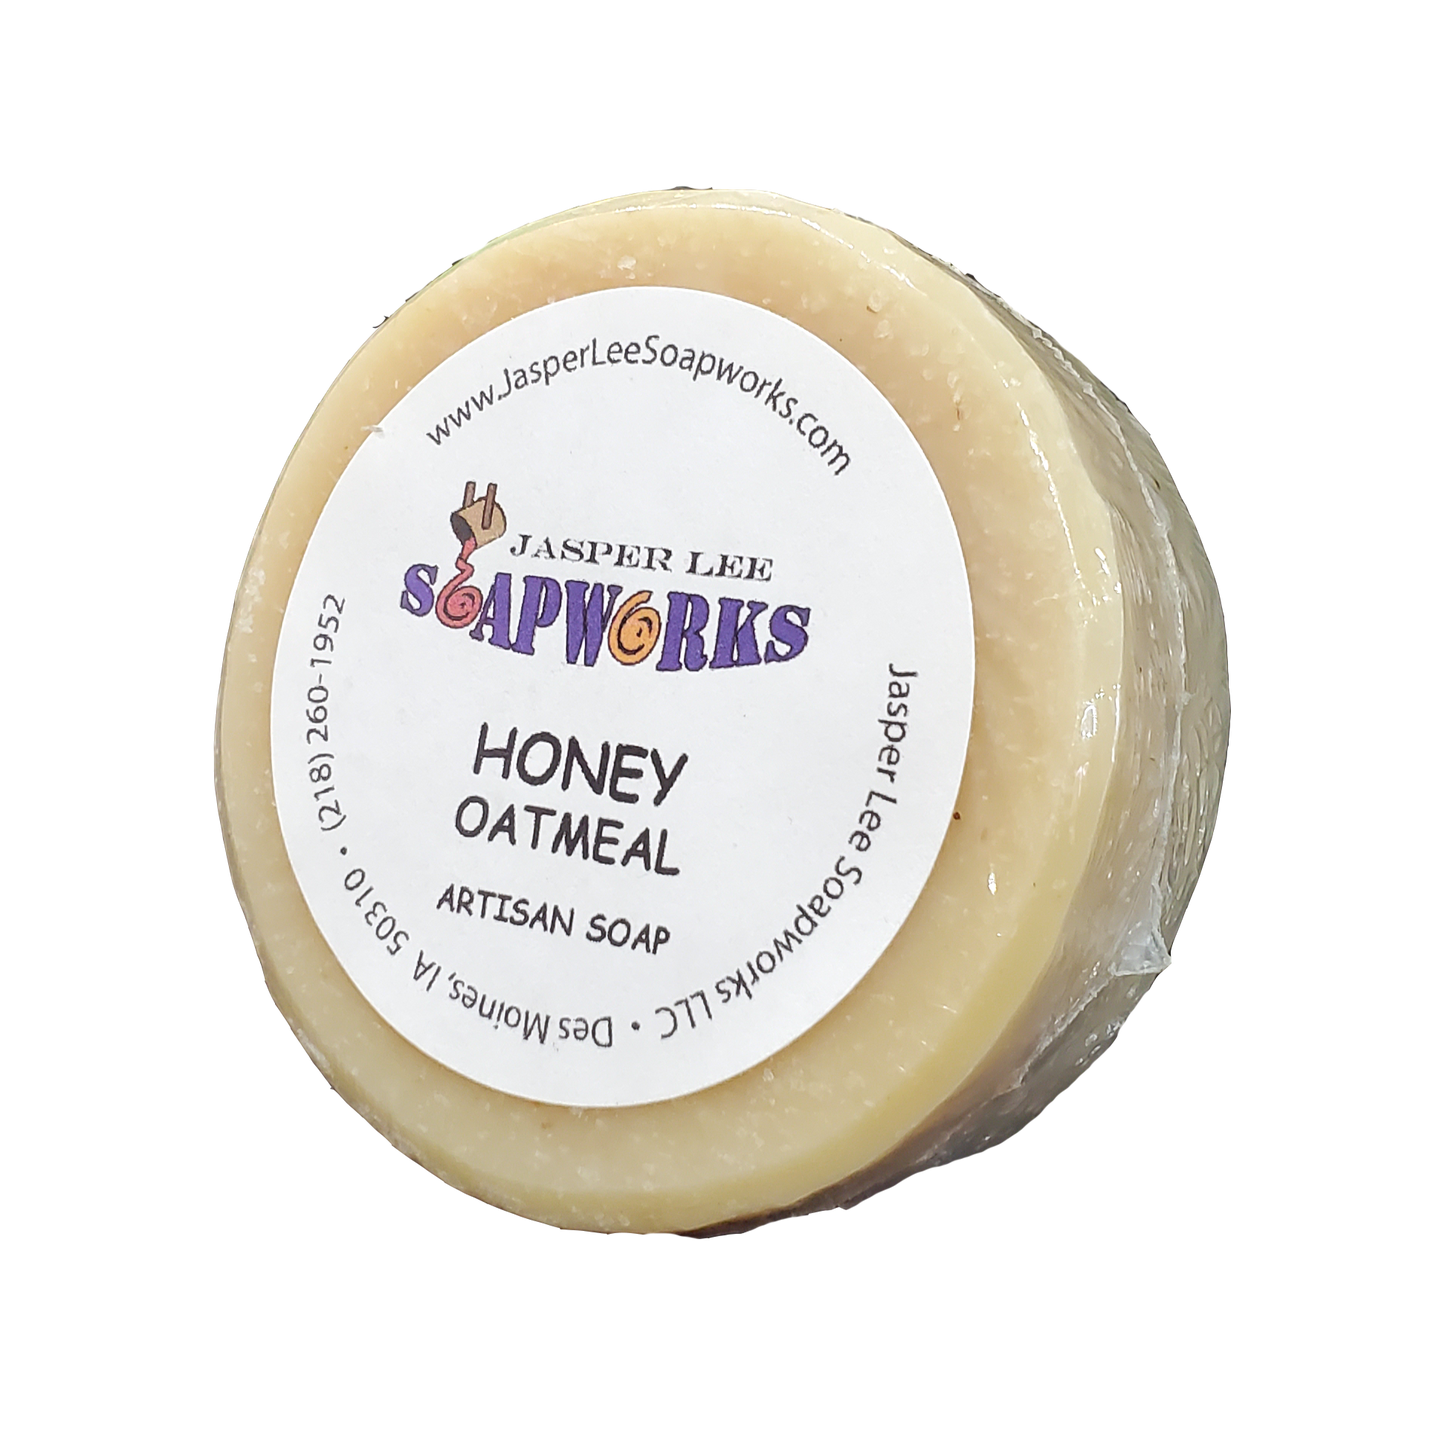 Round Honey Oatmeal soap bar in clear biodegradable packaging